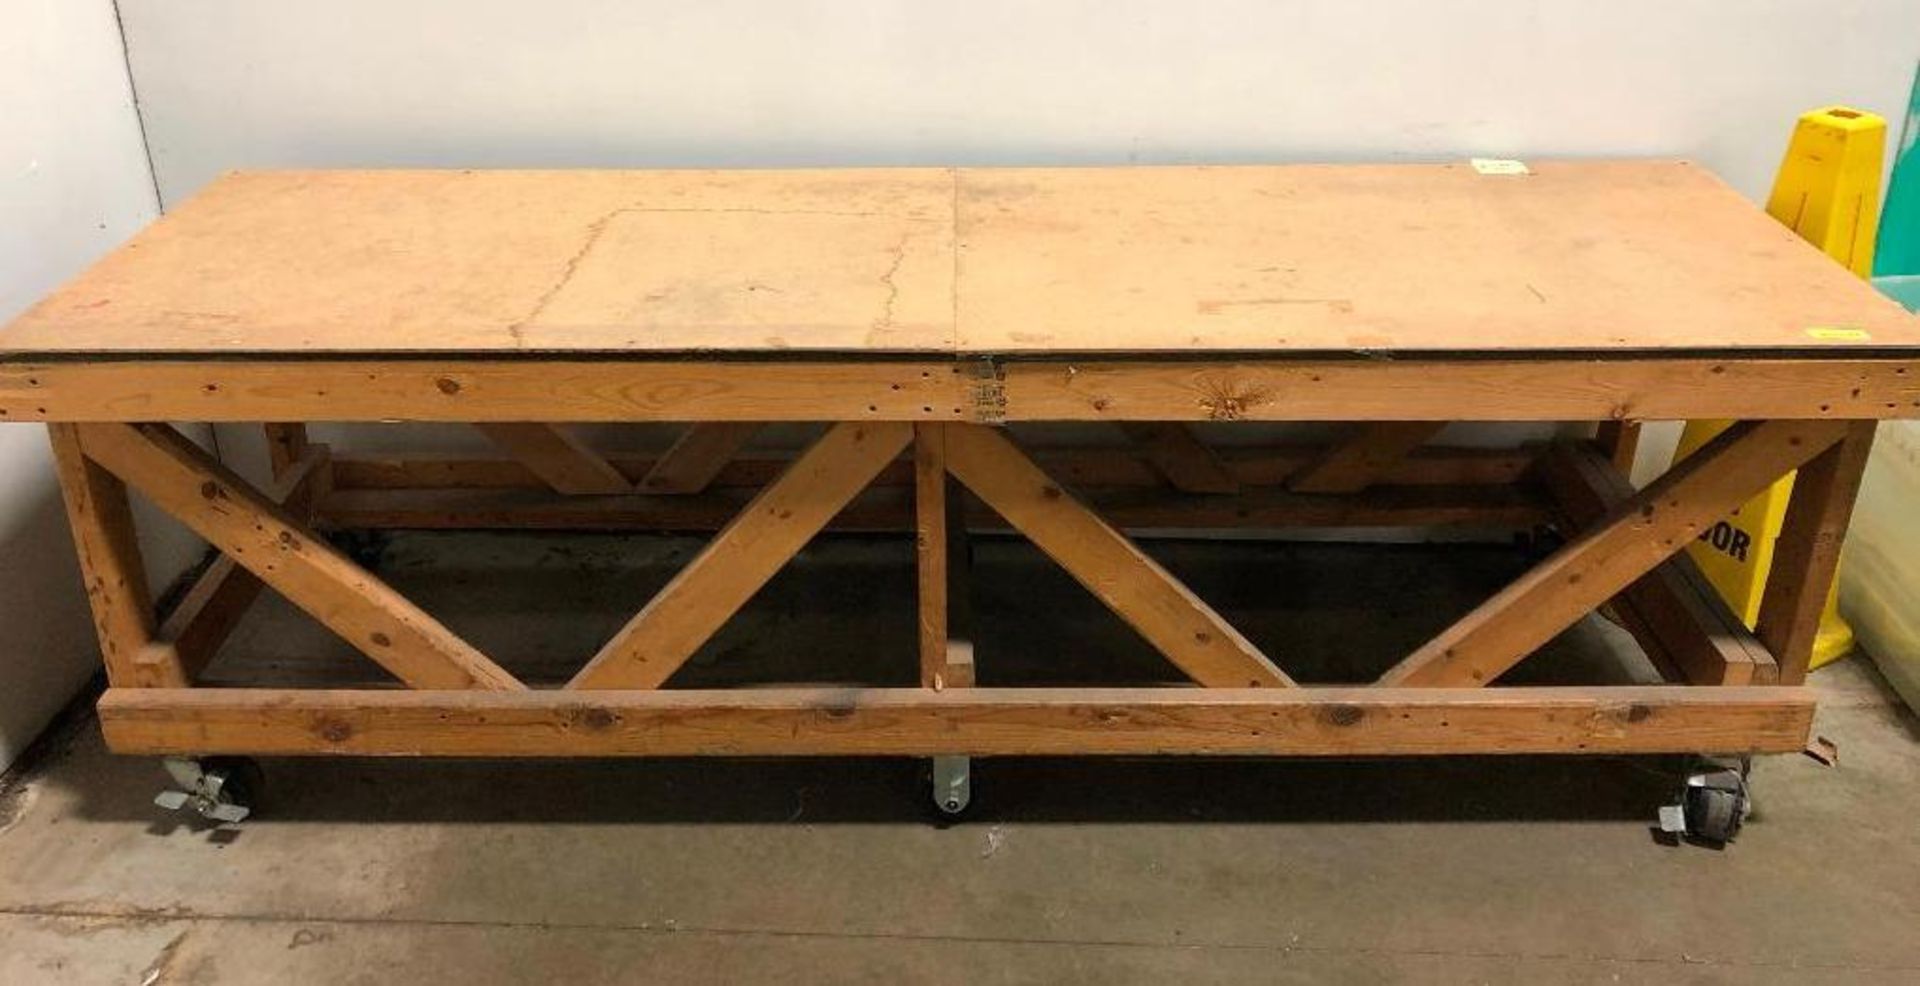 DESCRIPTION 96 IN WOODEN WORK TABLE ON CASTERS SIZE 96 IN X 30 IN X 30 IN LOCATION WAREHOUSE: BAY 1